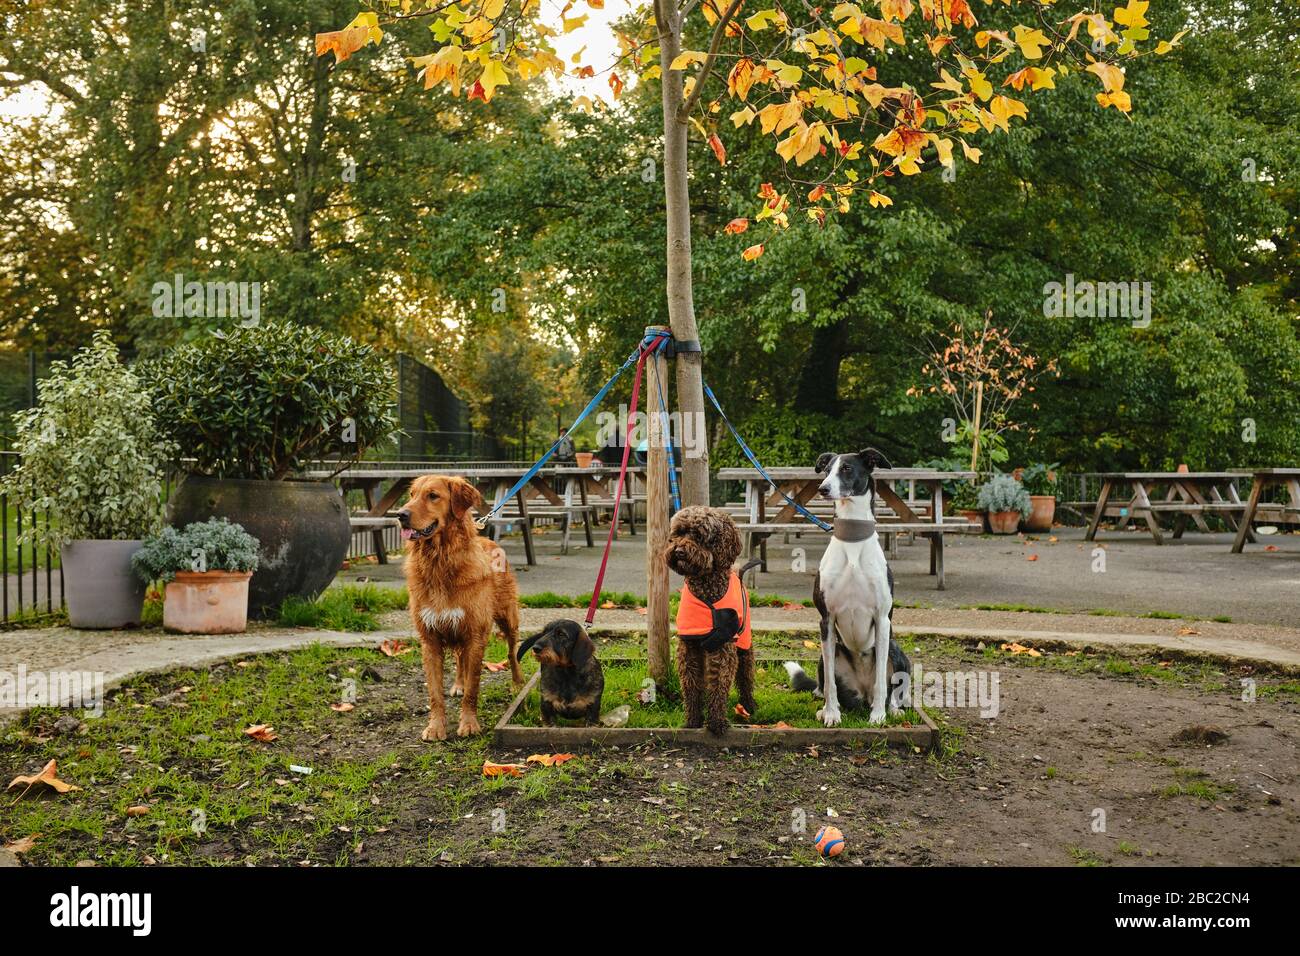 Four dogs, tied up, in London, UK. Stock Photo